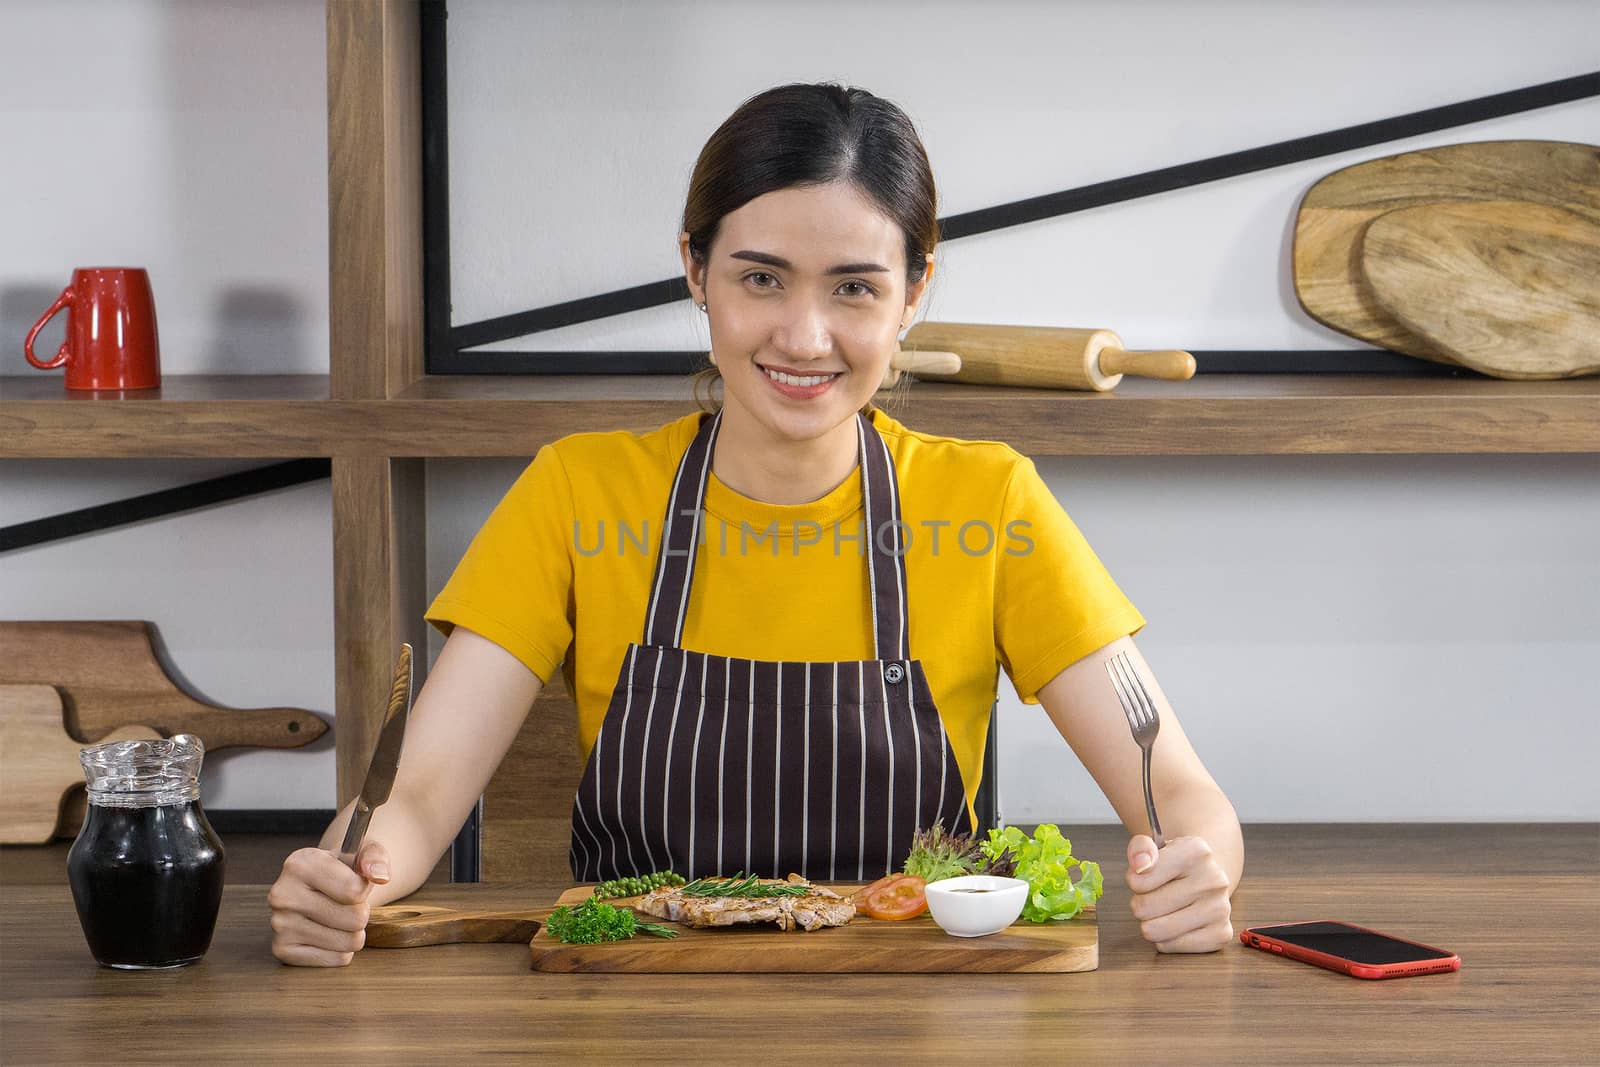 The housewife dressed in an apron, prepared a fork and knife, ready to eat a delicious steak. Morning atmosphere in a modern kitchen